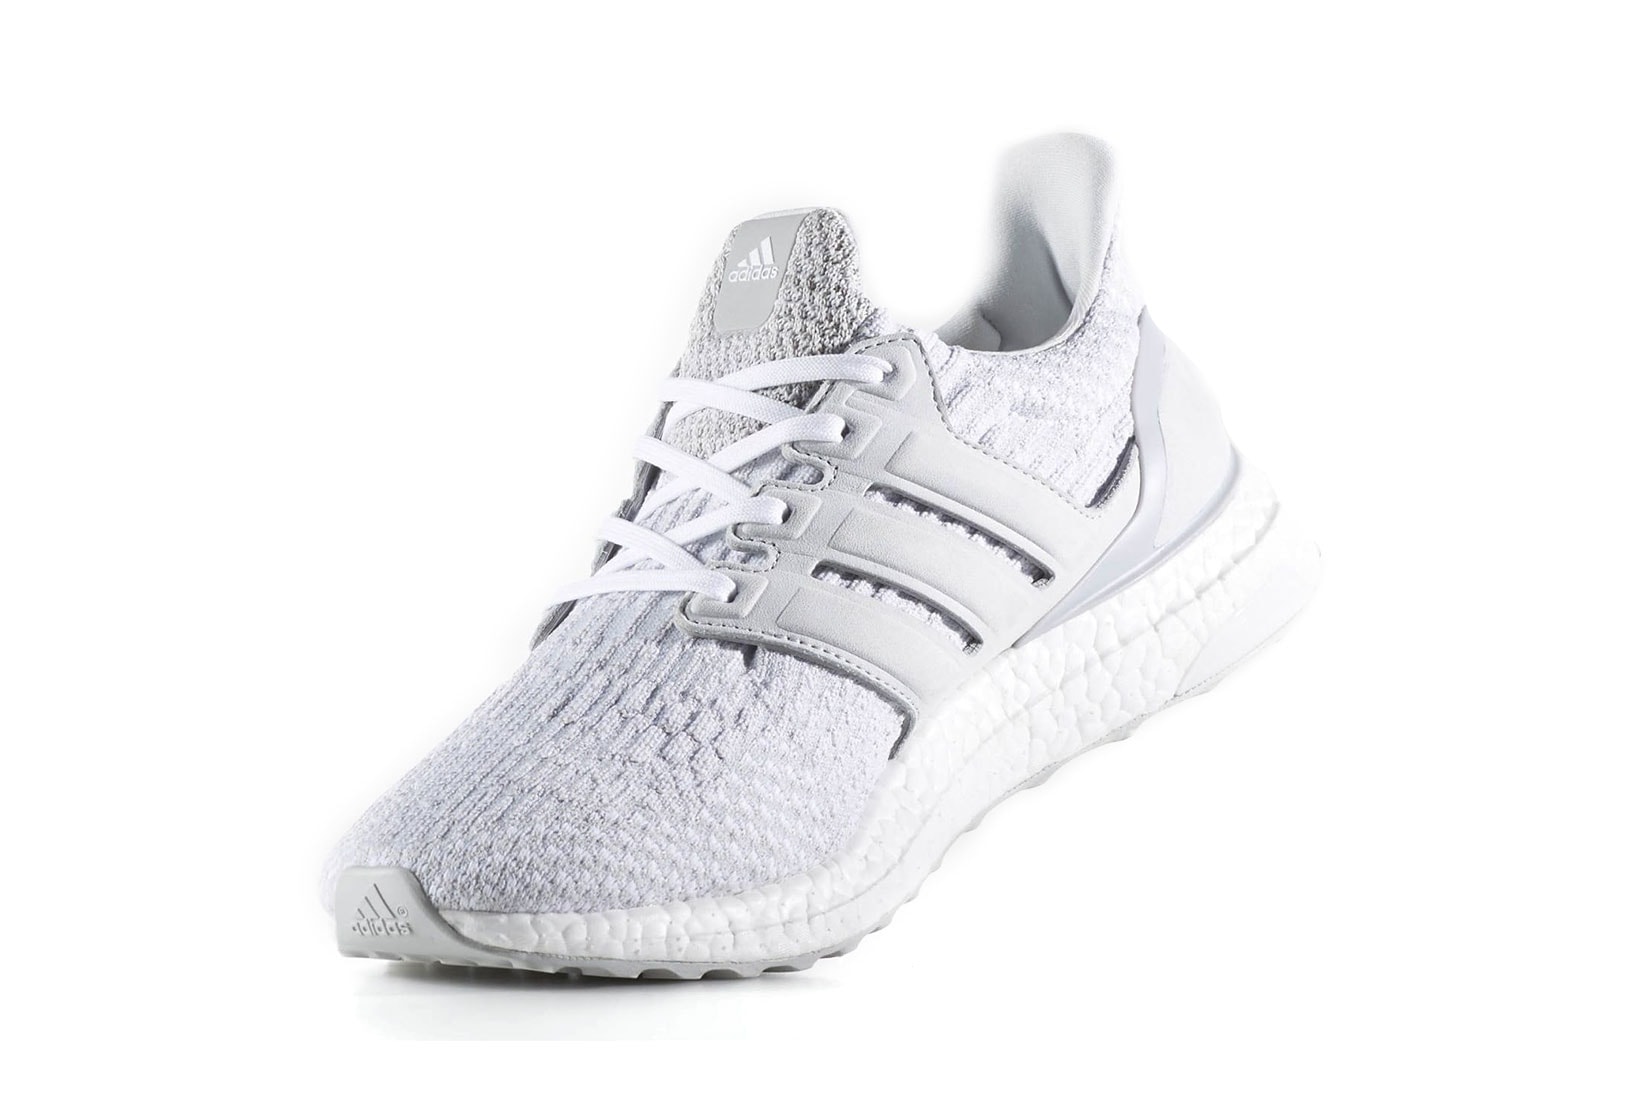 Reigning Champ adidas UltraBOOST in White and Gray | Hypebeast